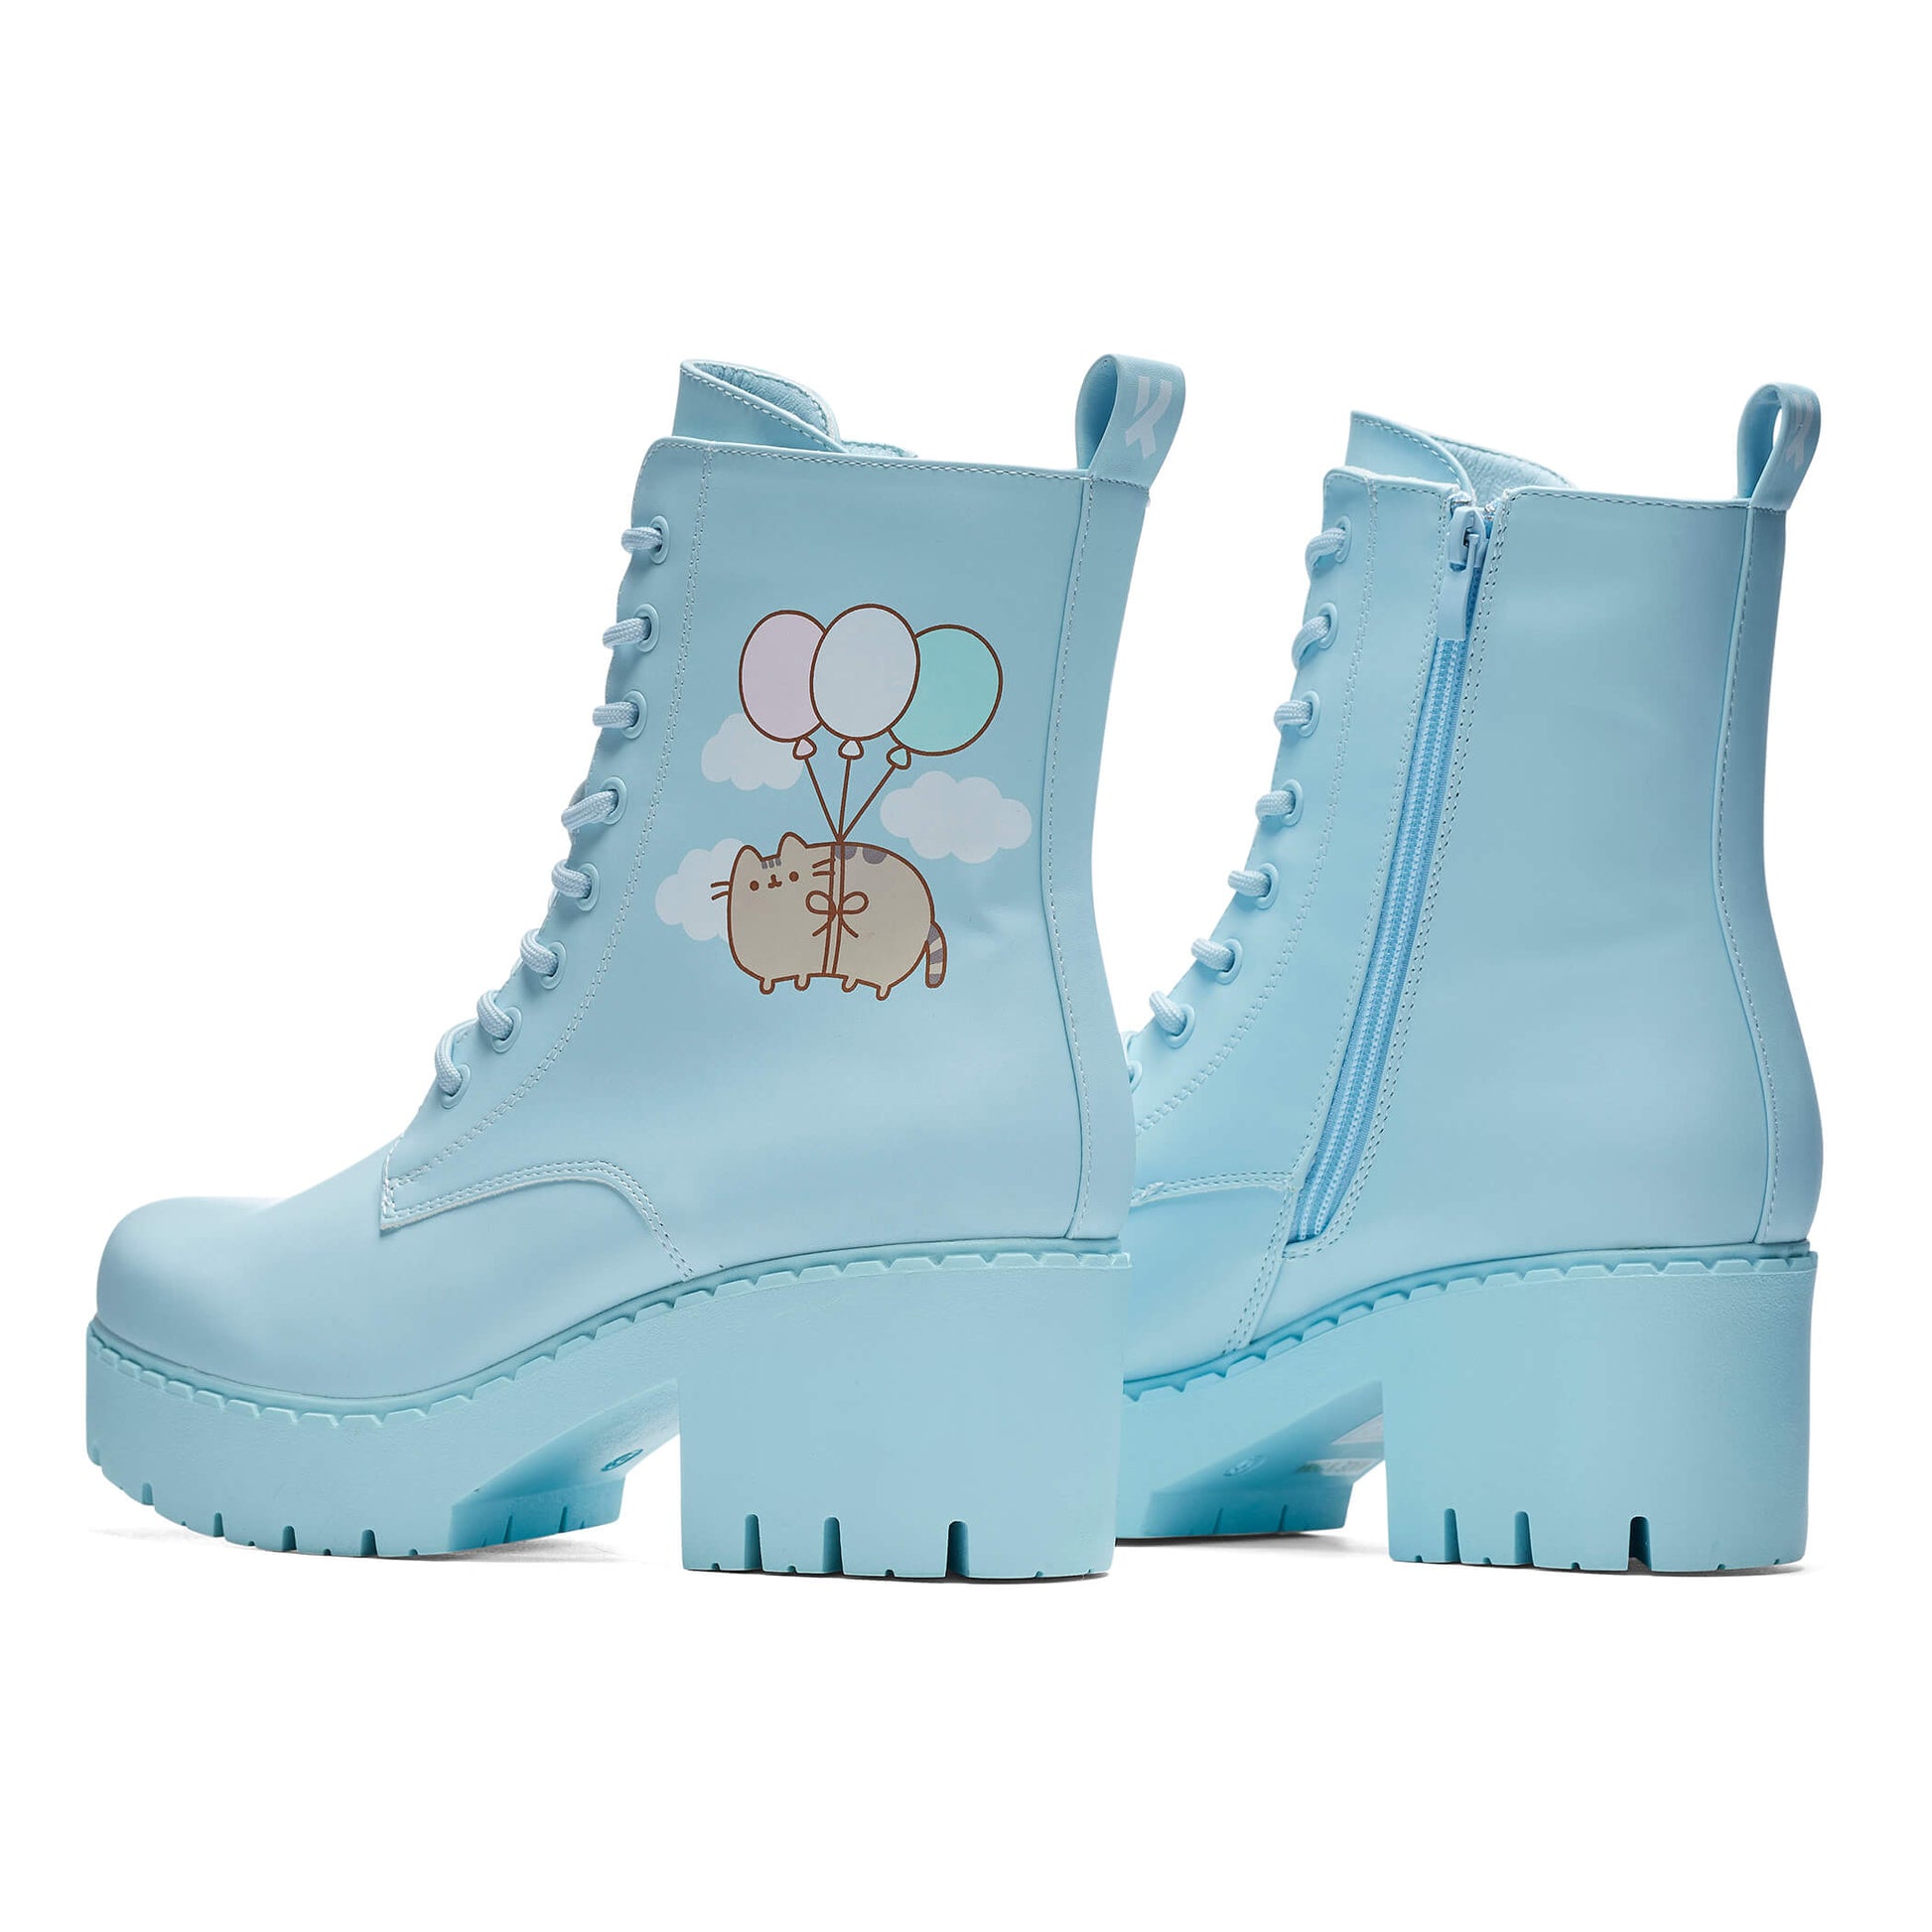 Flying Pusheen Sky Boots - Ankle Boots - KOI Footwear - Blue - Back Side View